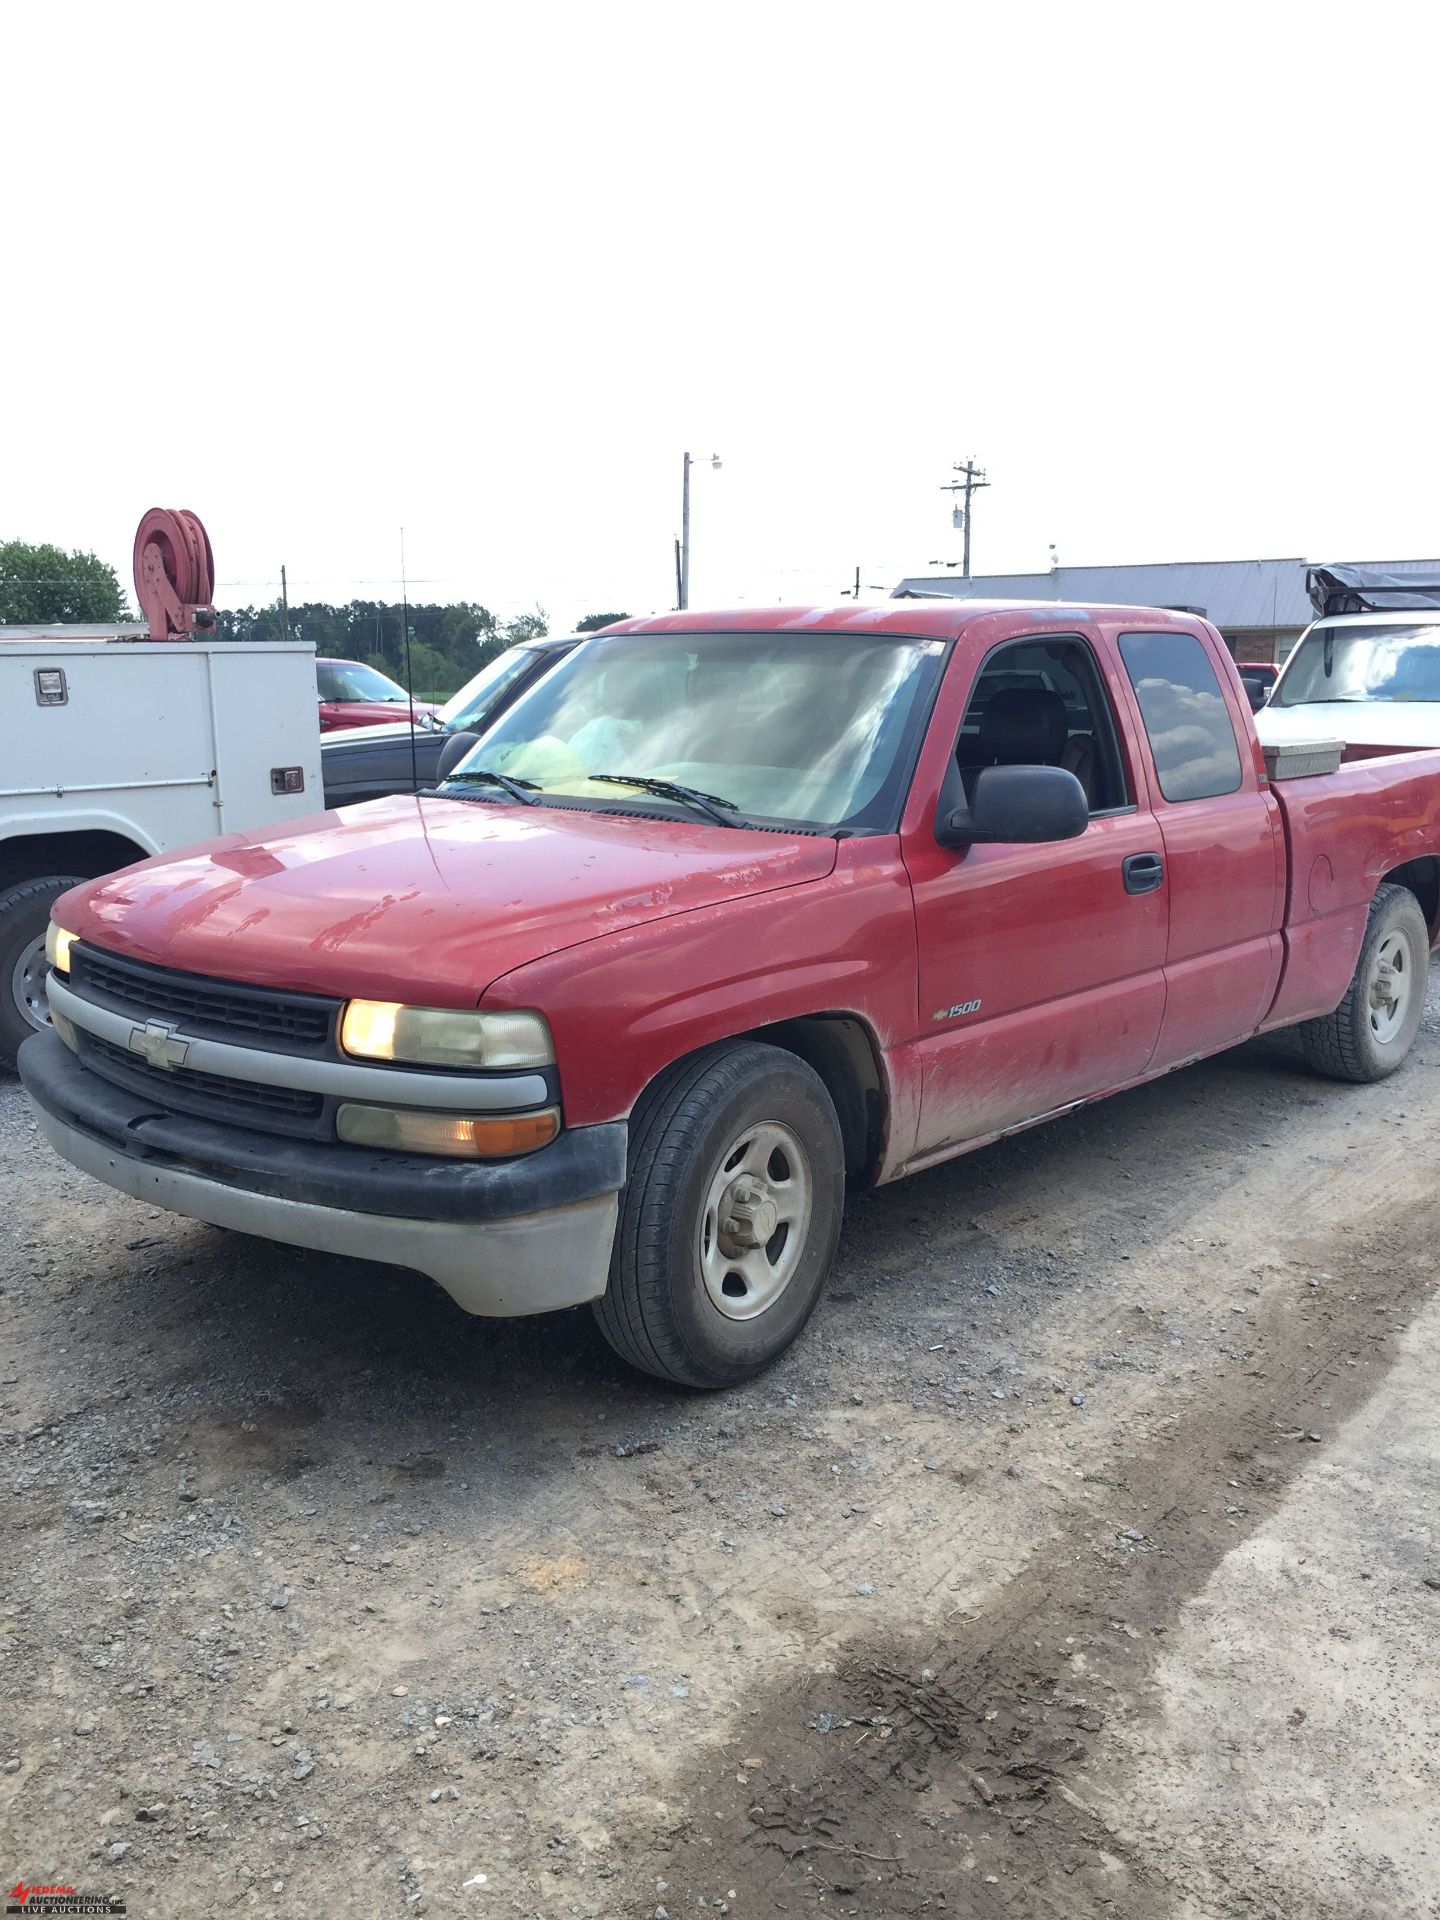 2001 CHEVROLET 1500 EXTENDED CAB PICKUP TRUCK, LONG BOX, 4.8L GAS ENGINE, AUTOMATIC TRANS, AM/FM/